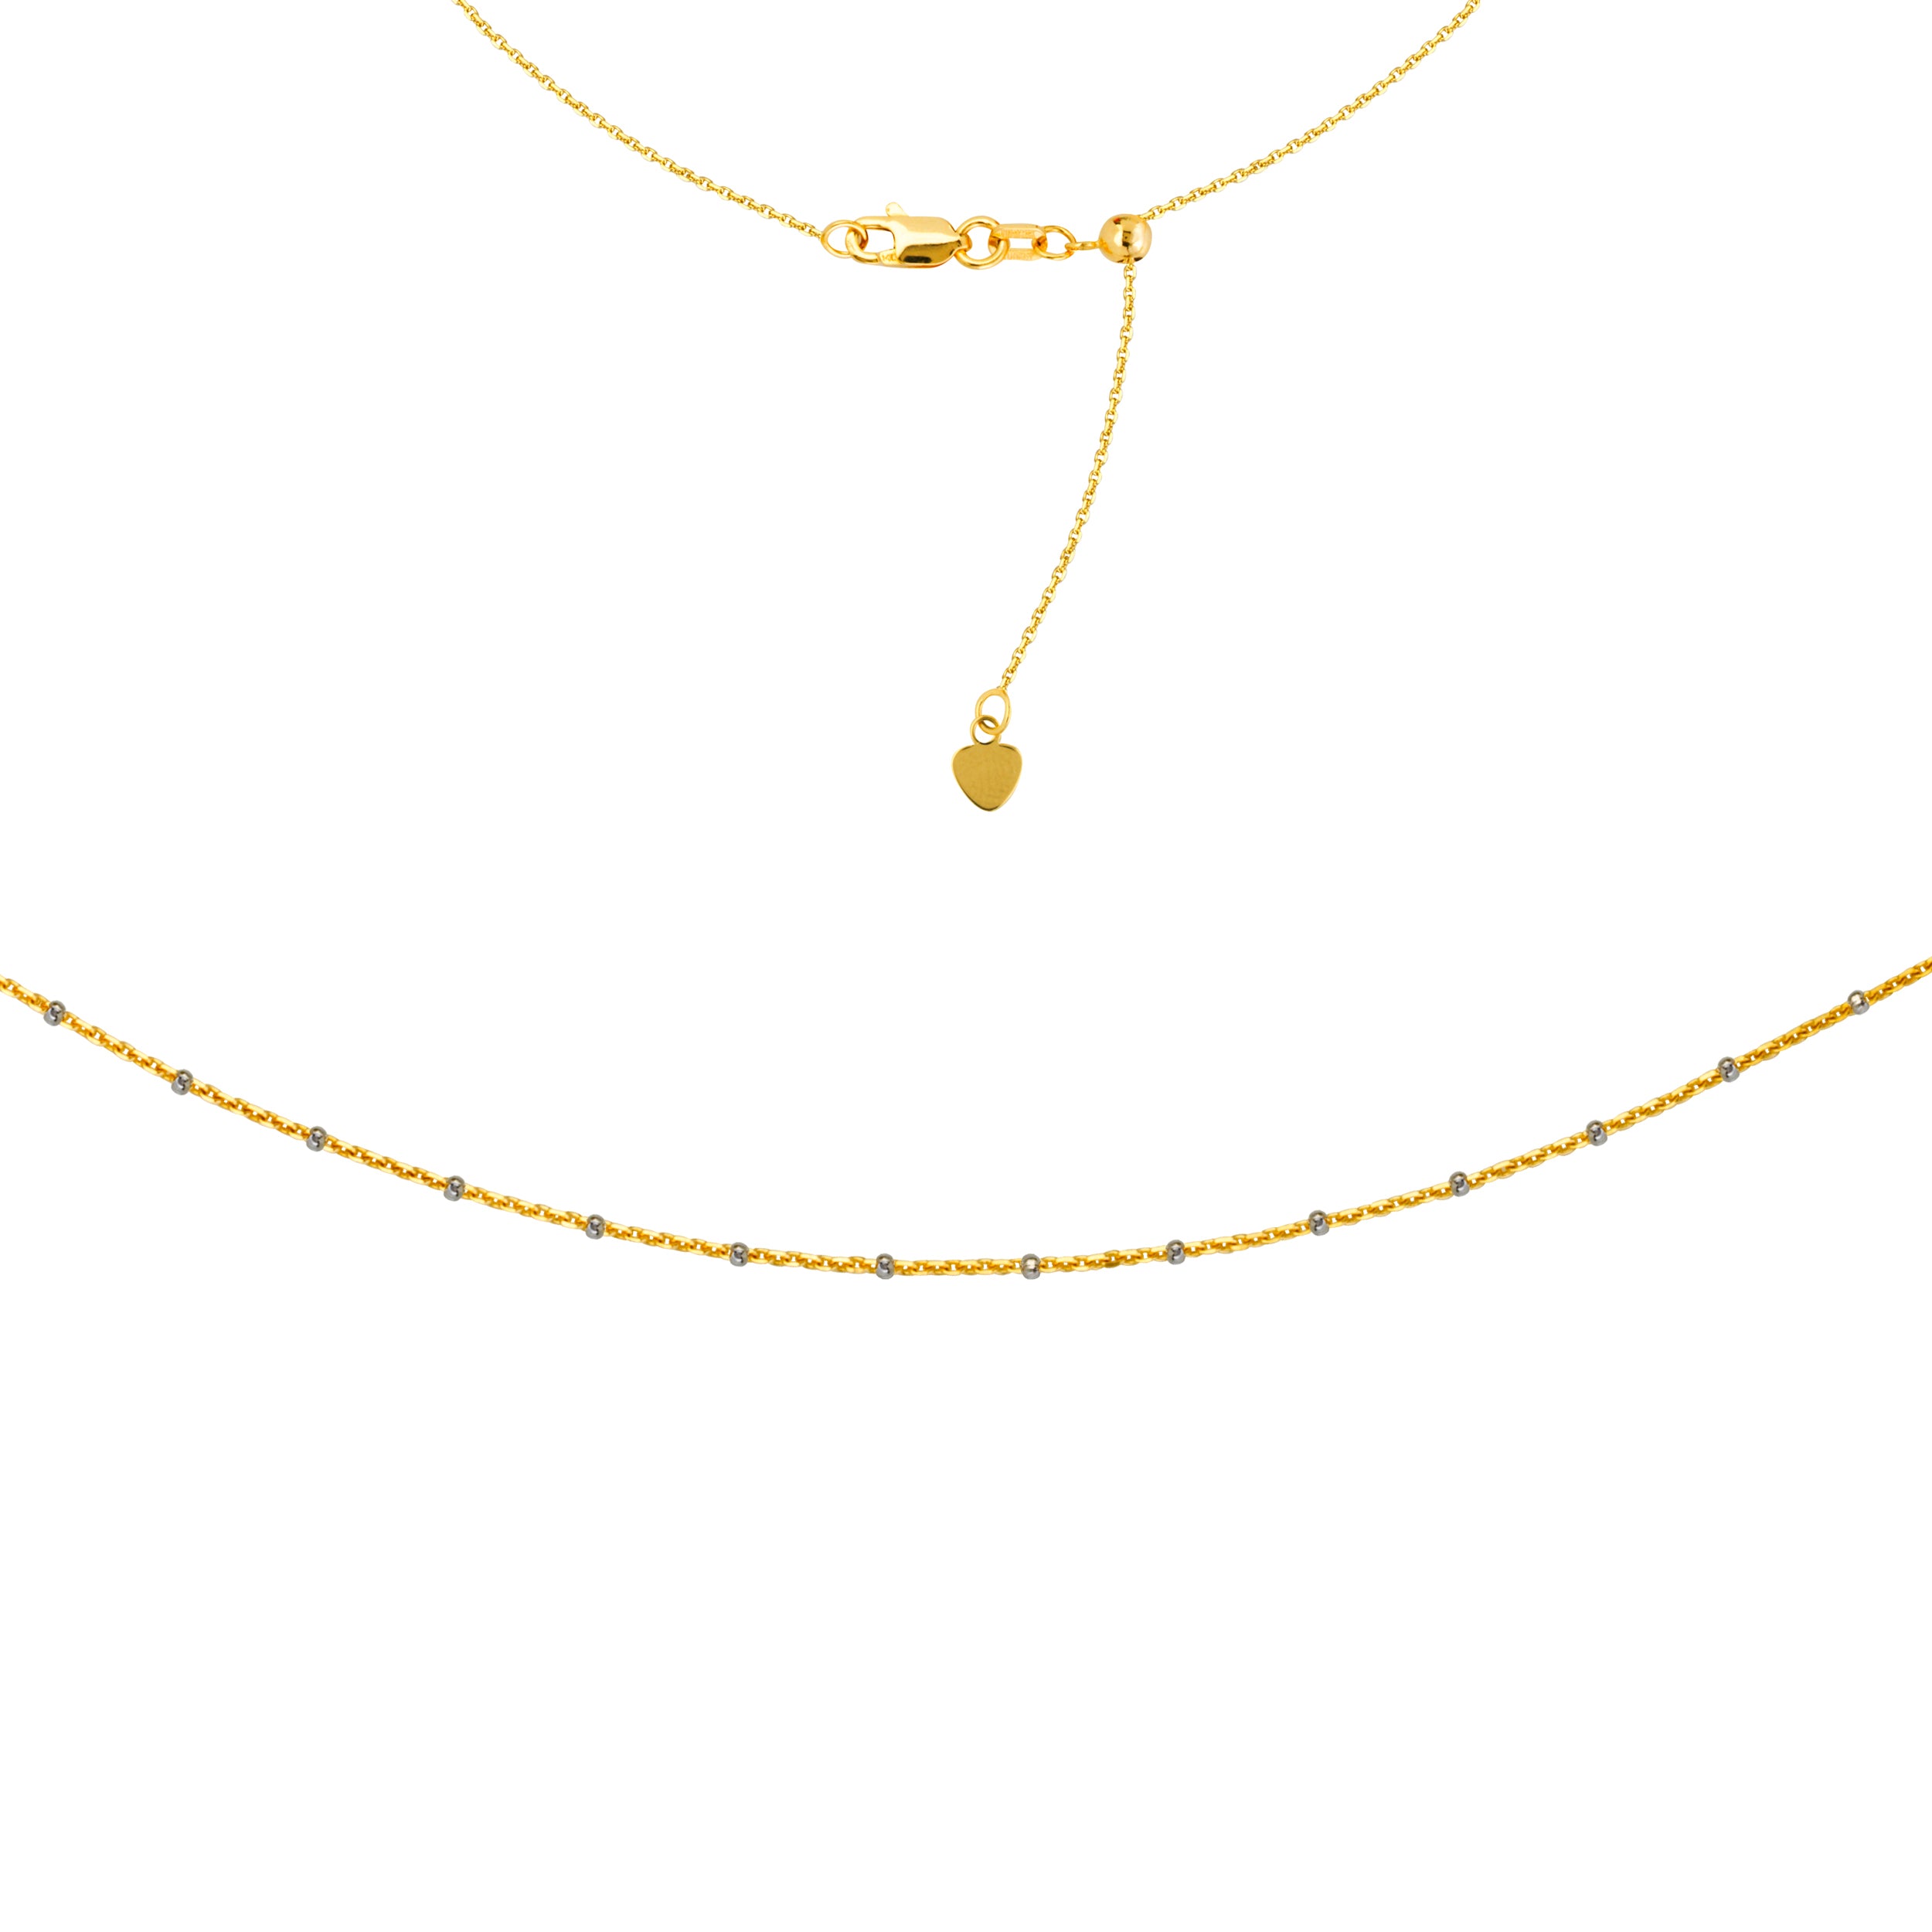 Two Tone Saturn Chain Choker 14k Yellow Gold Necklace, 16" Adjustable fine designer jewelry for men and women